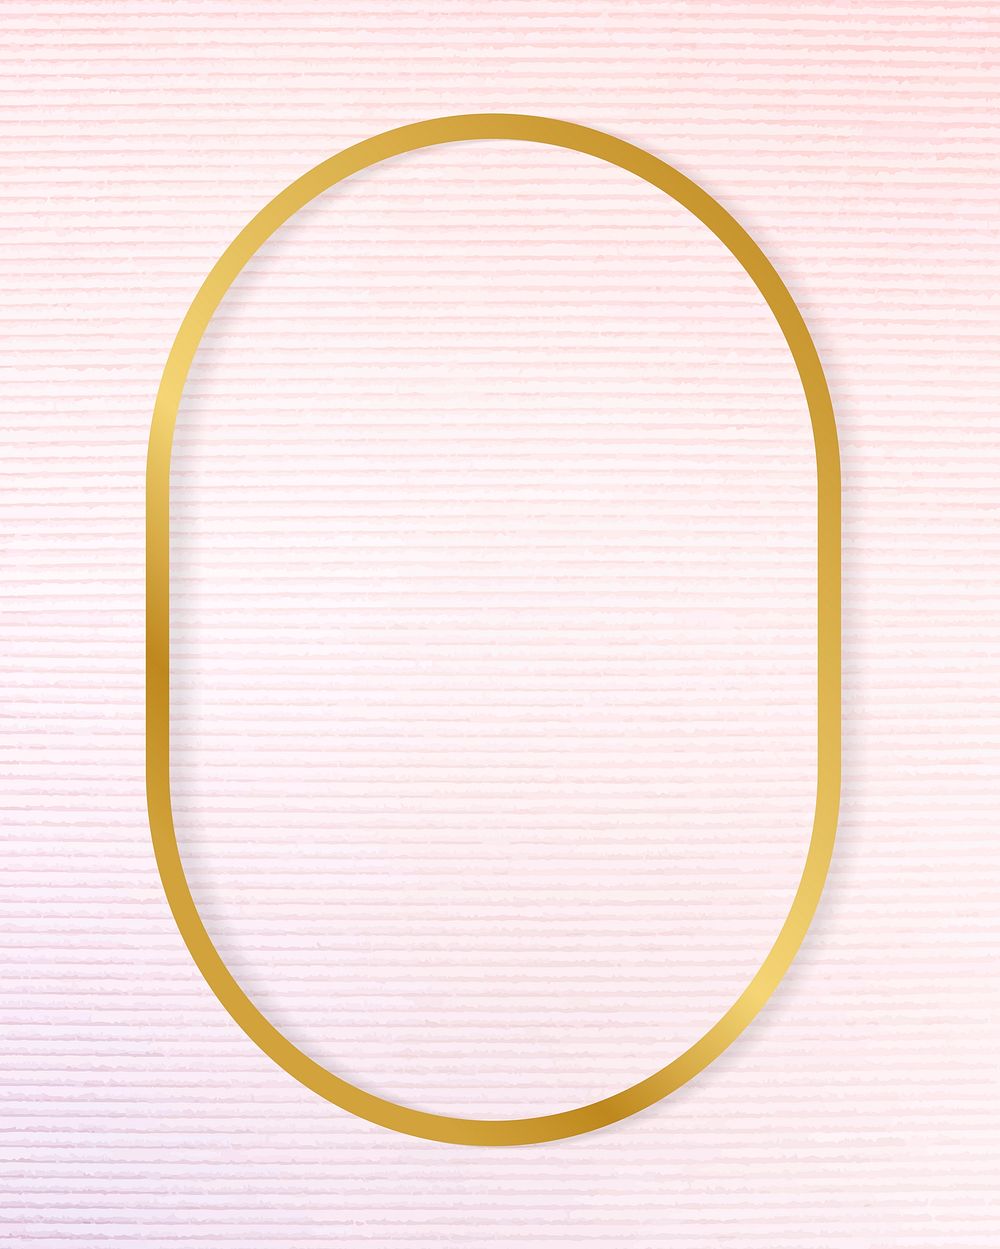 Gold oval oval frame on a pinkish blue fabric background vector